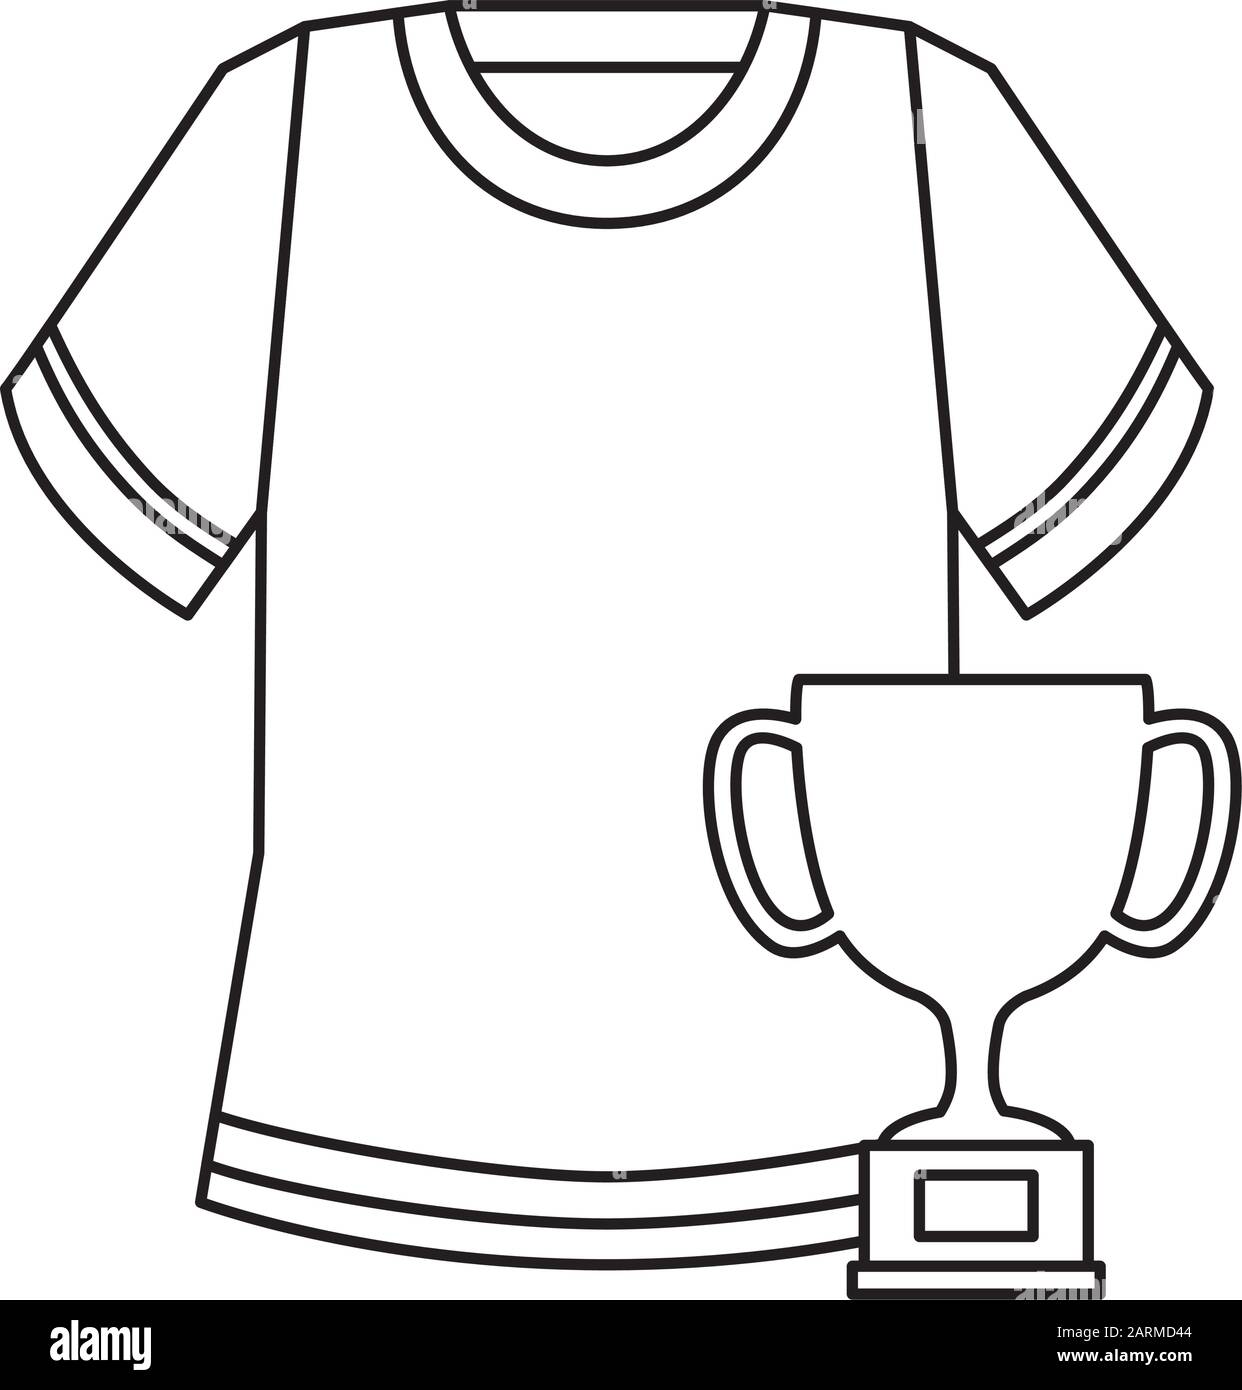 cup trophy and american football shirt Stock Vector